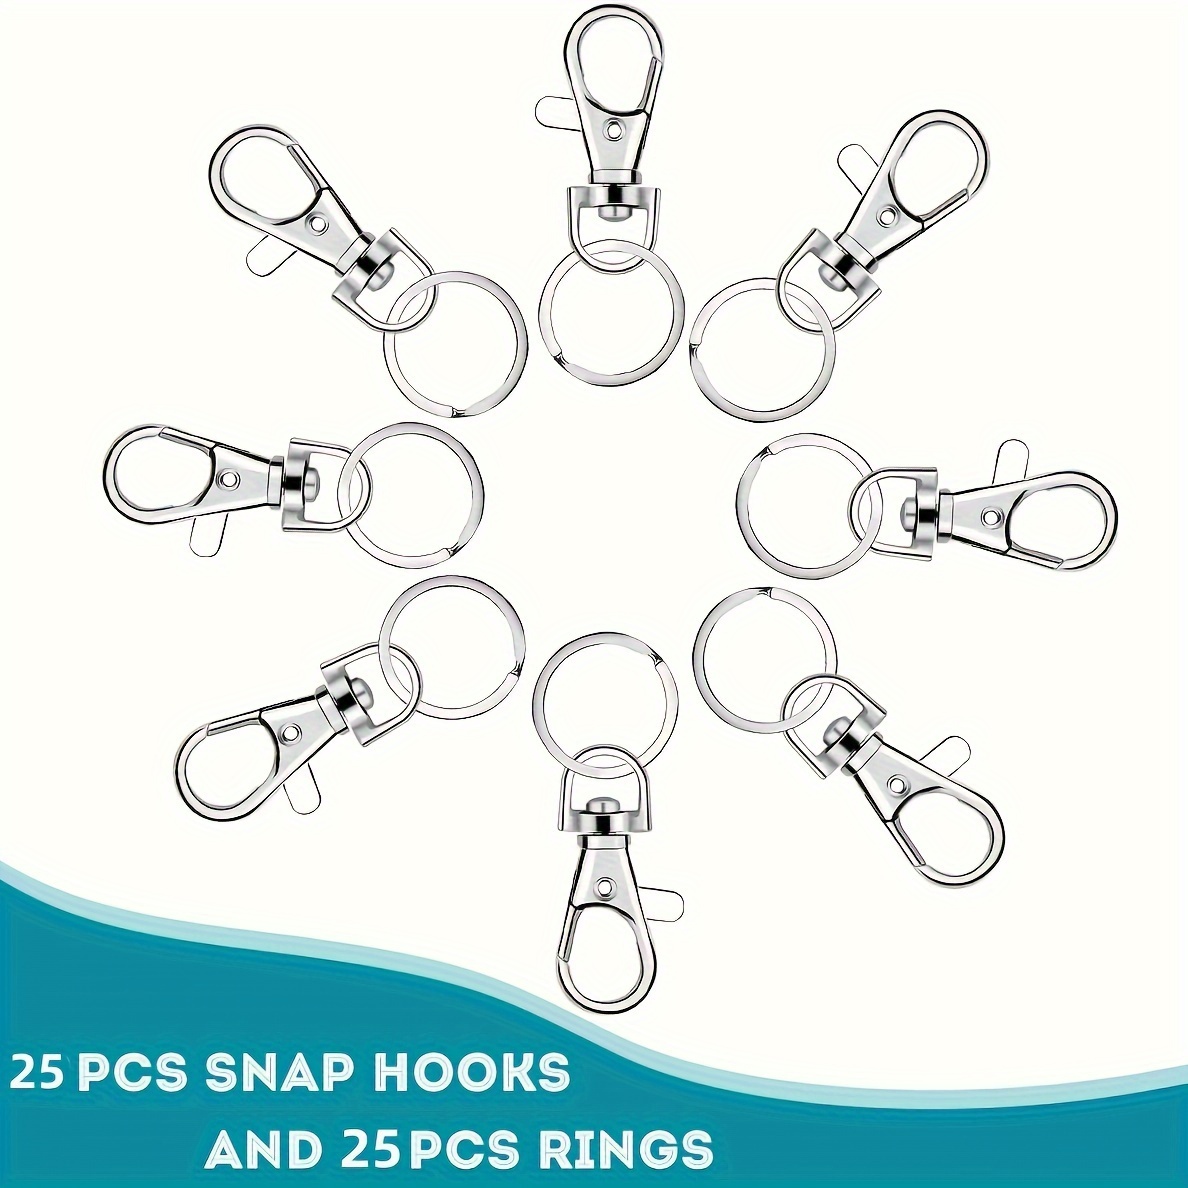 

50pcs Key Chain Hooks With Key Rings, Key Chain Clip Hooks With Rings, Used For Diy Process Of Hanging Rope (25 Metal Lobster Claw Rings+25 Separate Key Rings), Ideal Choice For Gifts